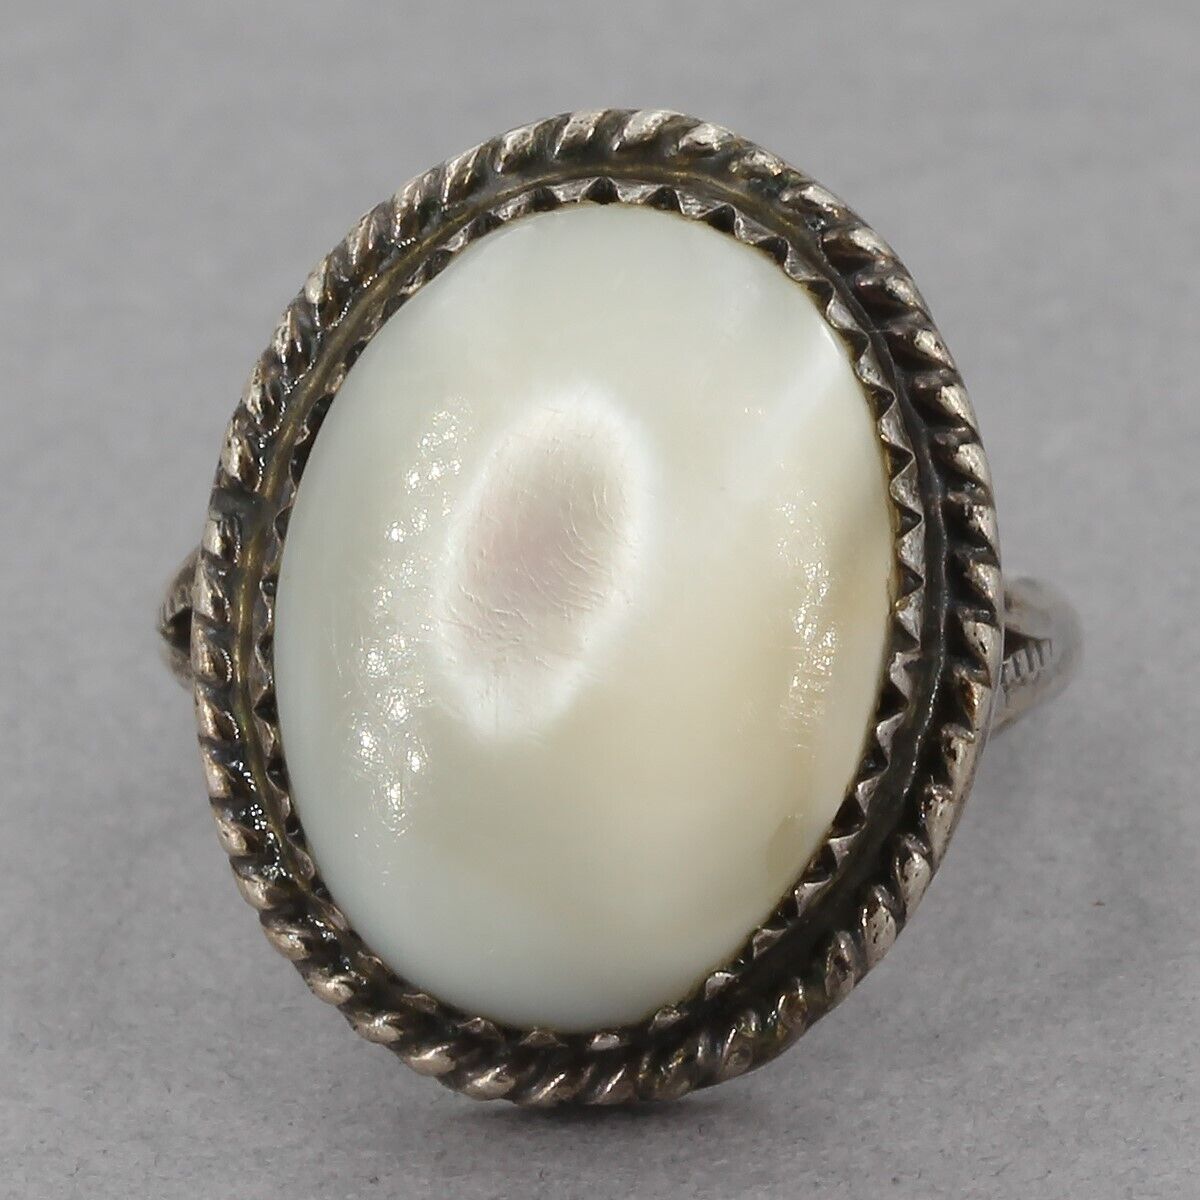 VTG Native American Navajo Signed Yazzie Sterling Mother of Pearl Ring Sz 6.25